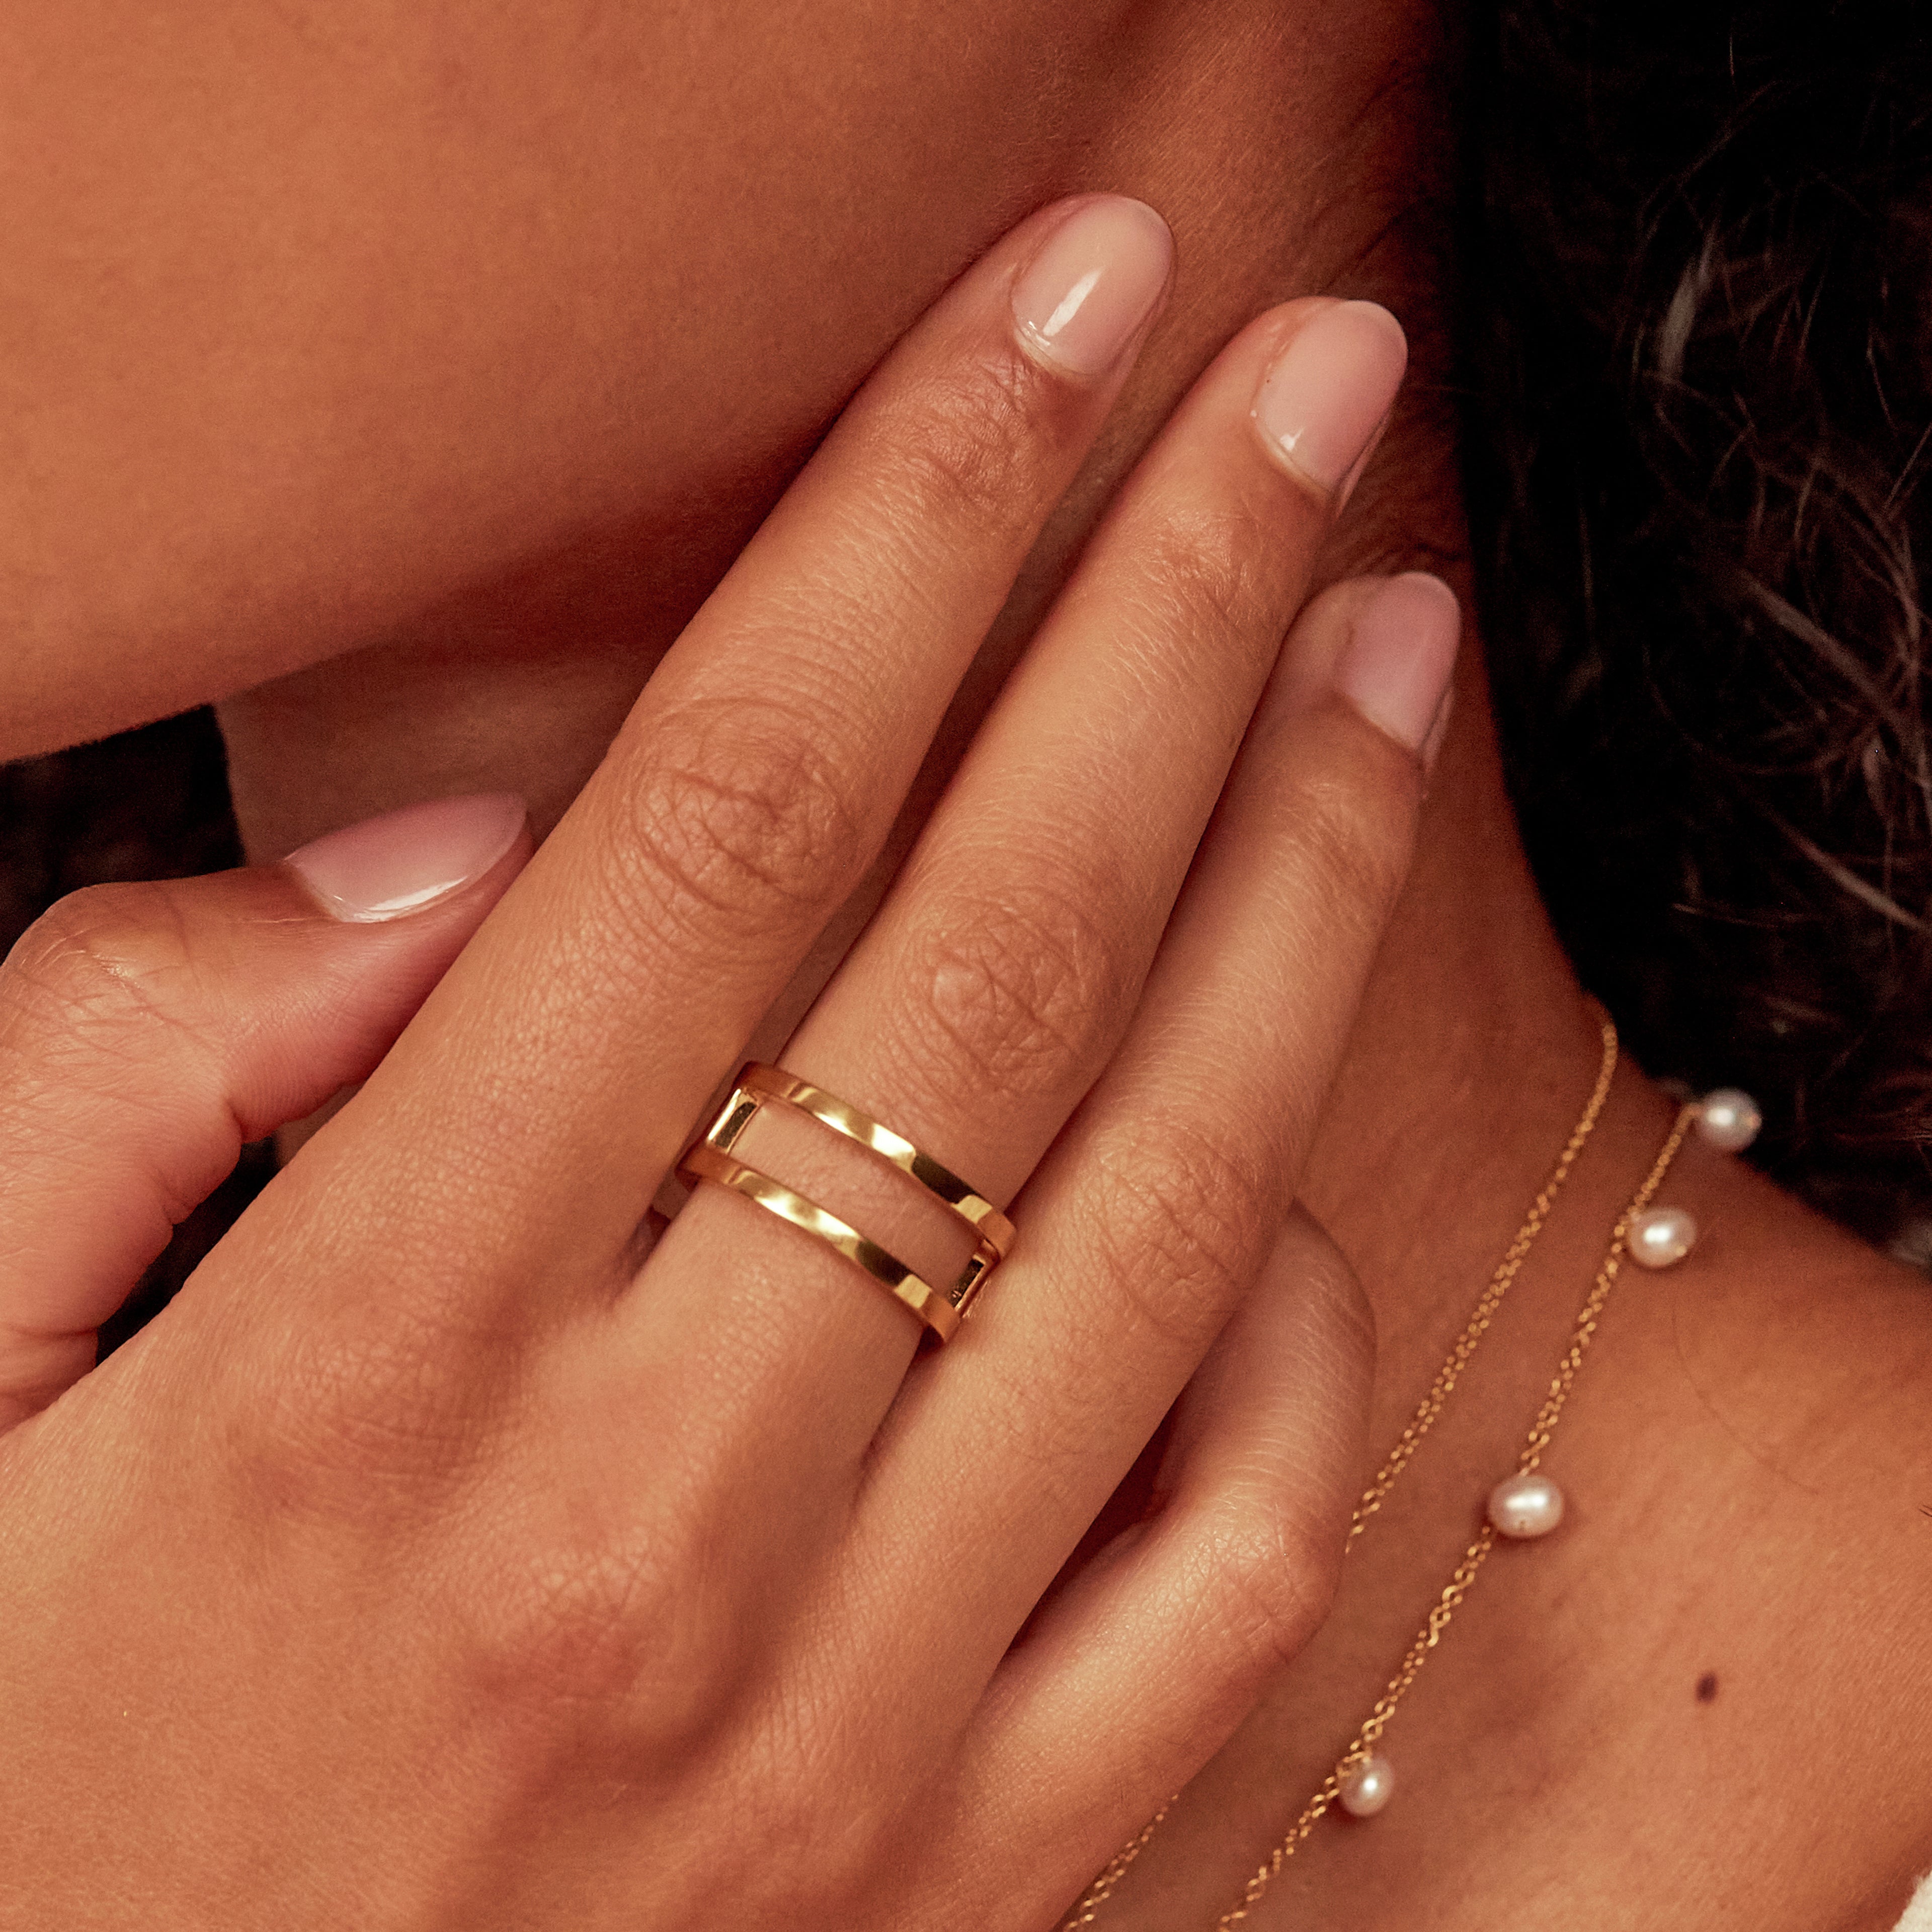 Gold double band ring on a hand with a pearl necklace